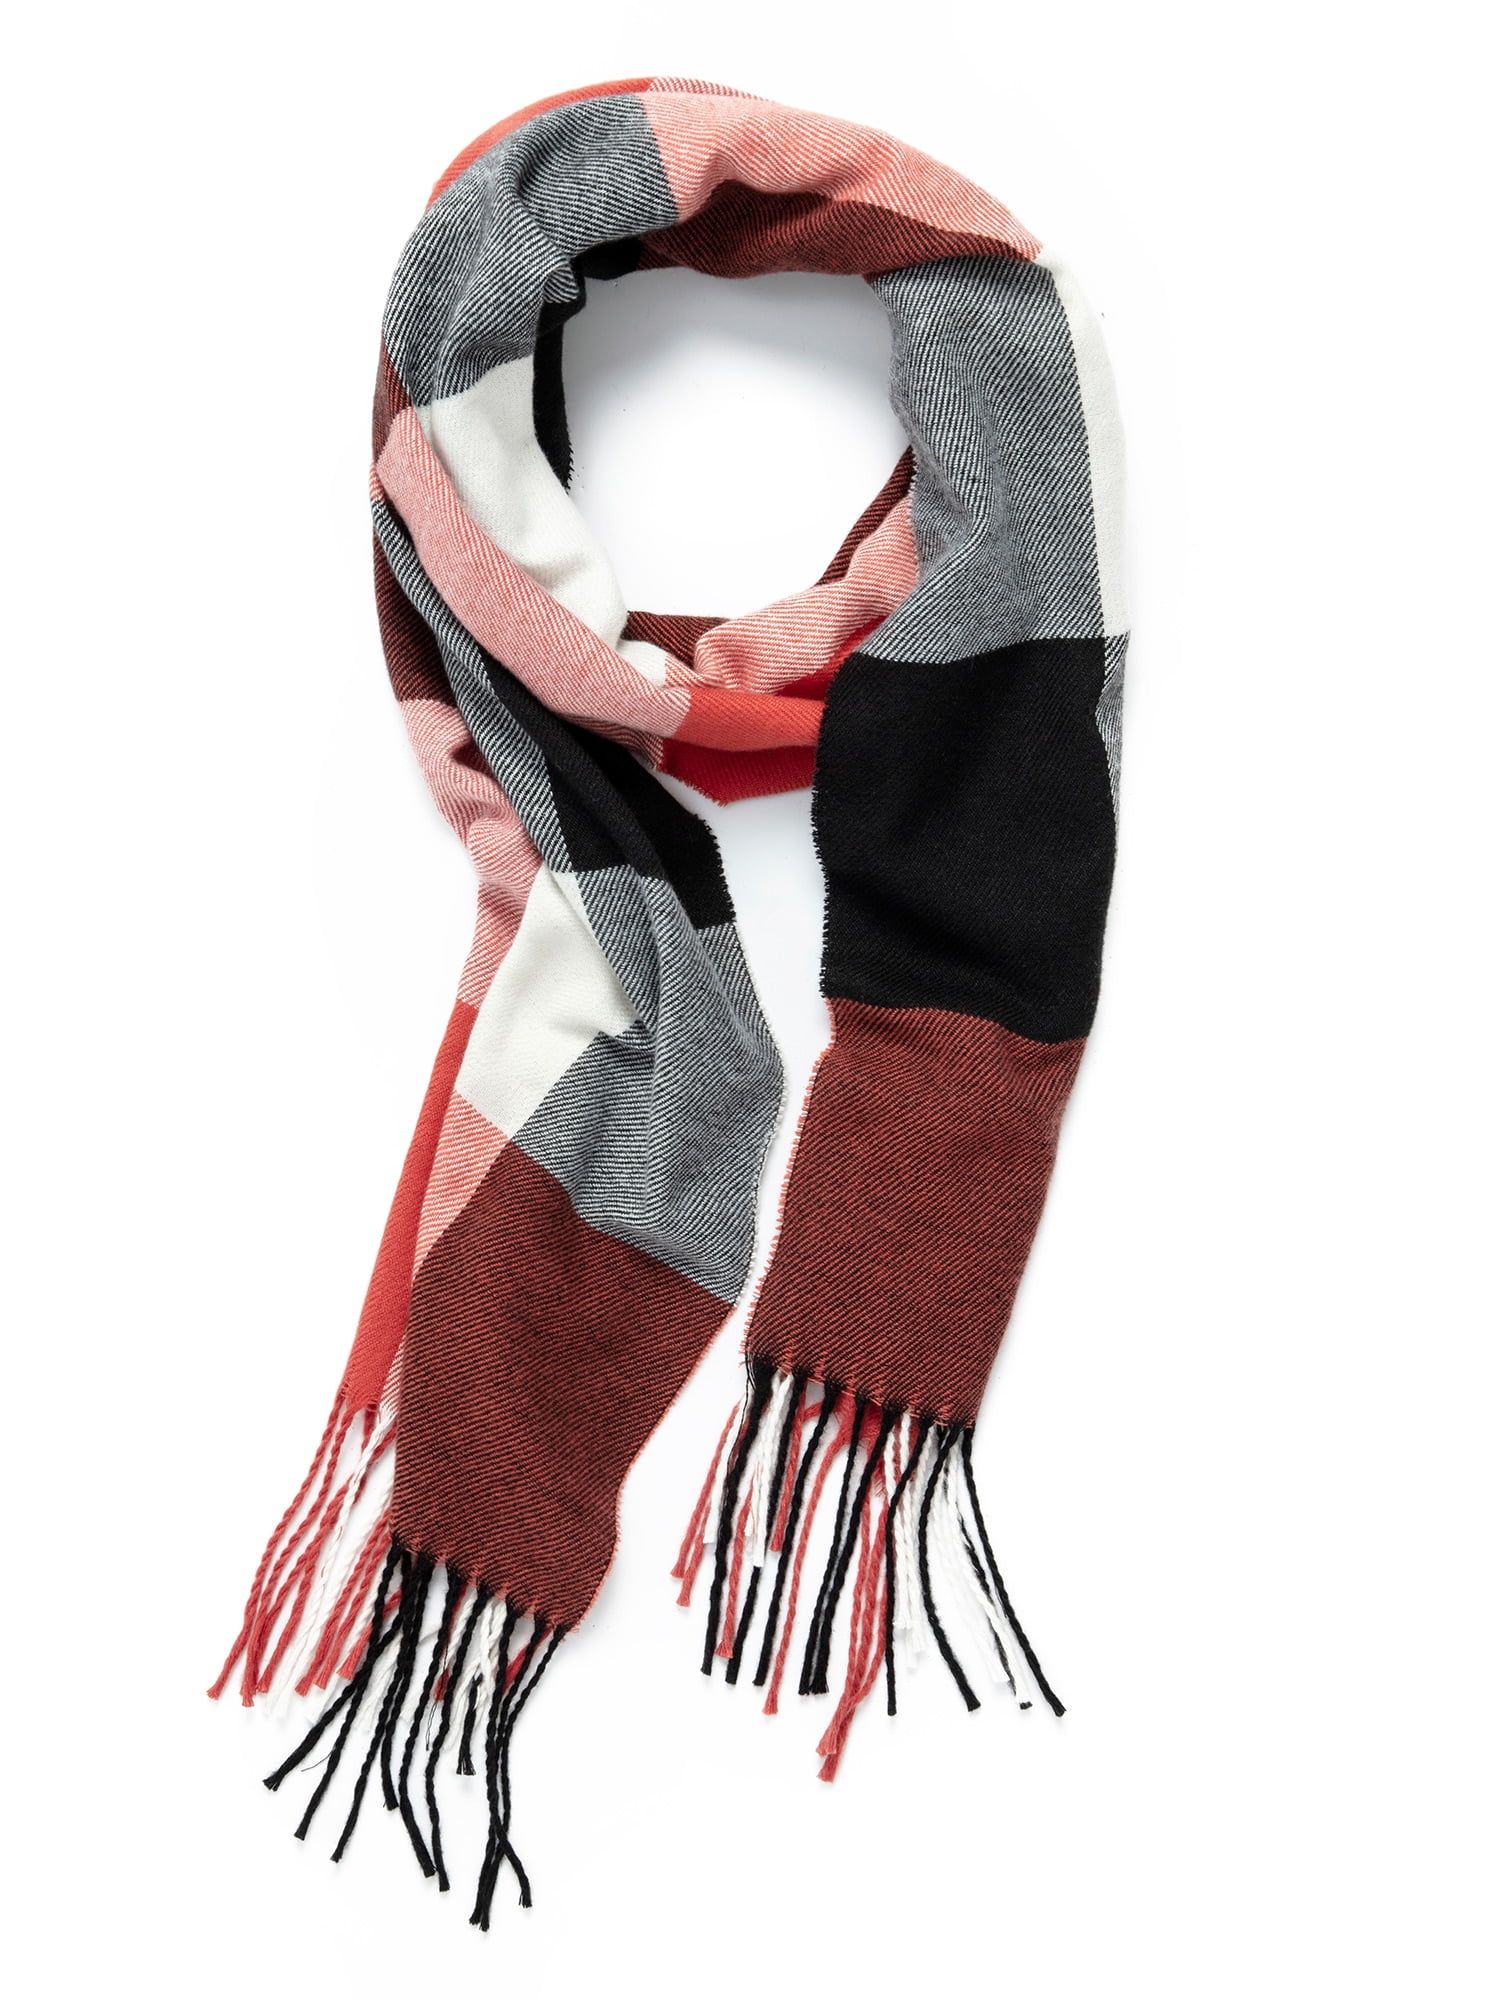 Unisex Plaid Knit Scarfs, Cashmere Feel Ultra Soft Classic Scarf For